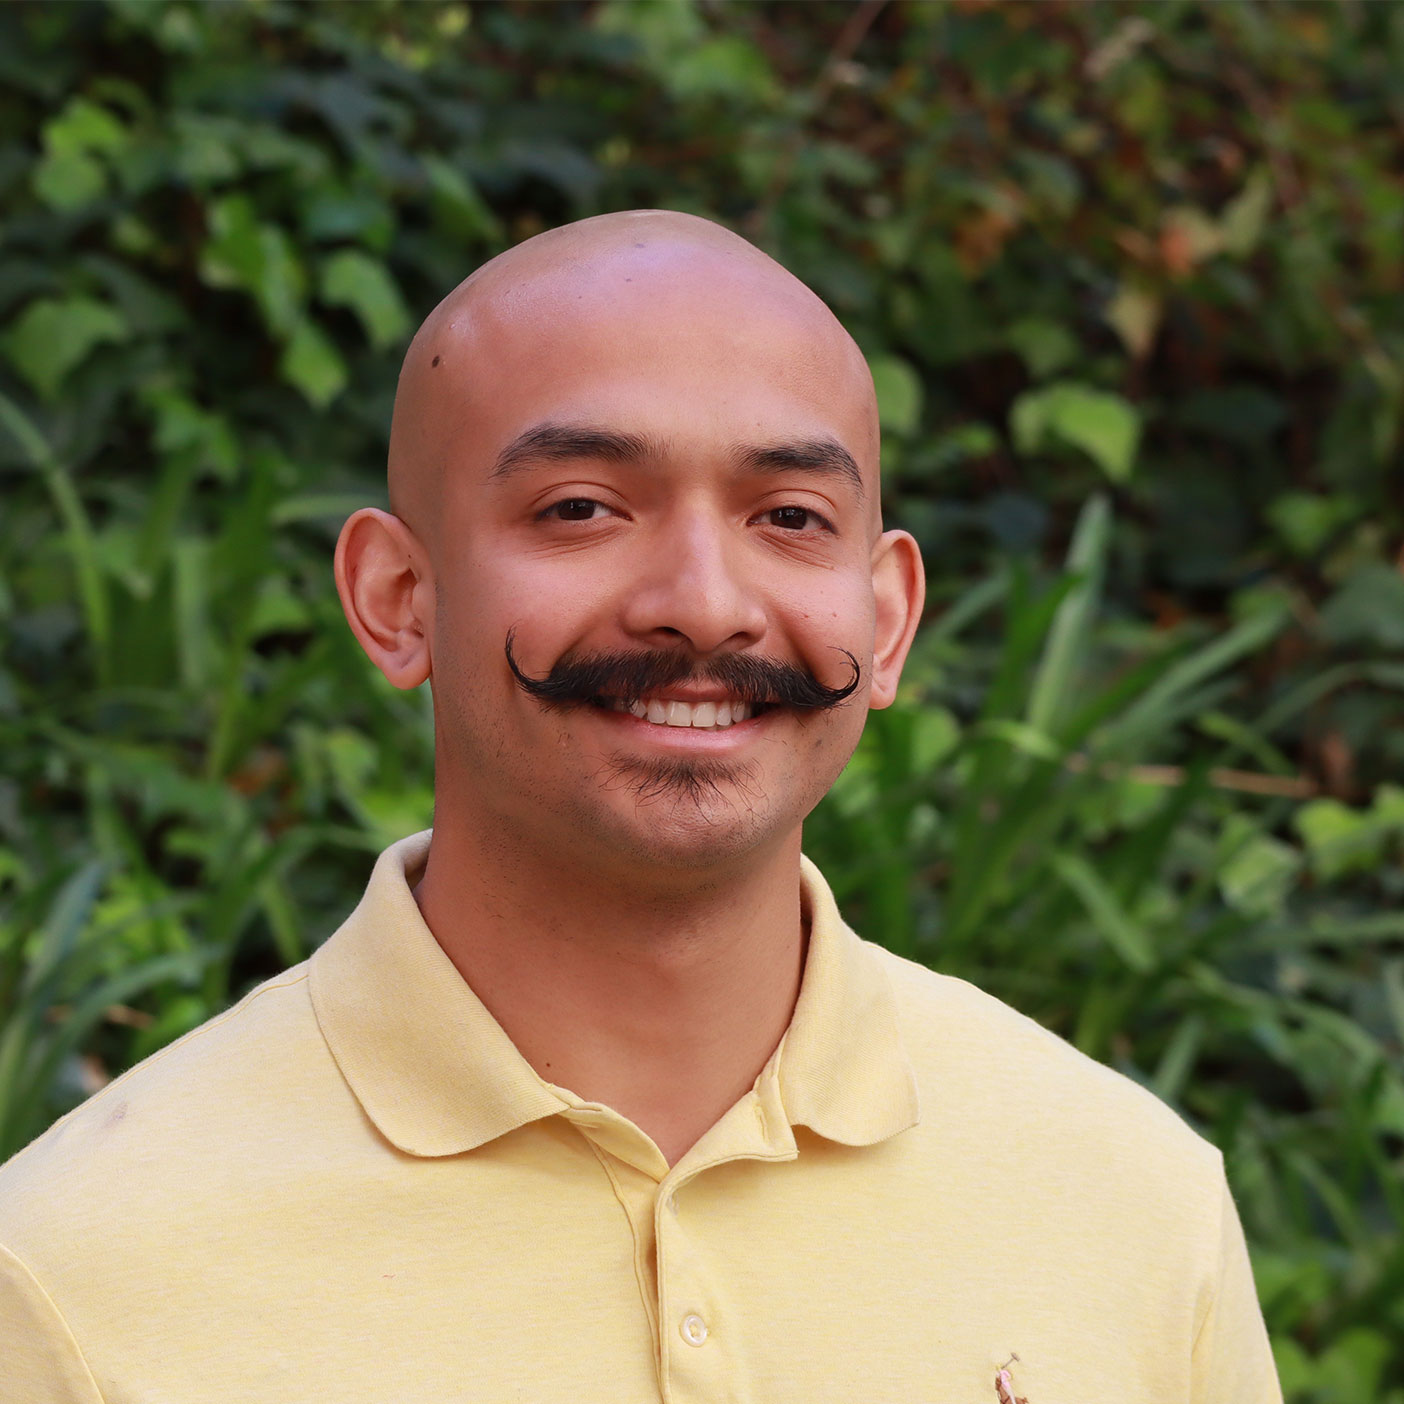 Headshot of scholar. Green plants behind scholar. Scholar is bald. Has a black mustache and the mustache curls up on both ends of face. There is a little bit of facial hair below their bottom lip. Wearing a soft yellow button up polo shirt with a symbol on the shirt . Smiling with teeth